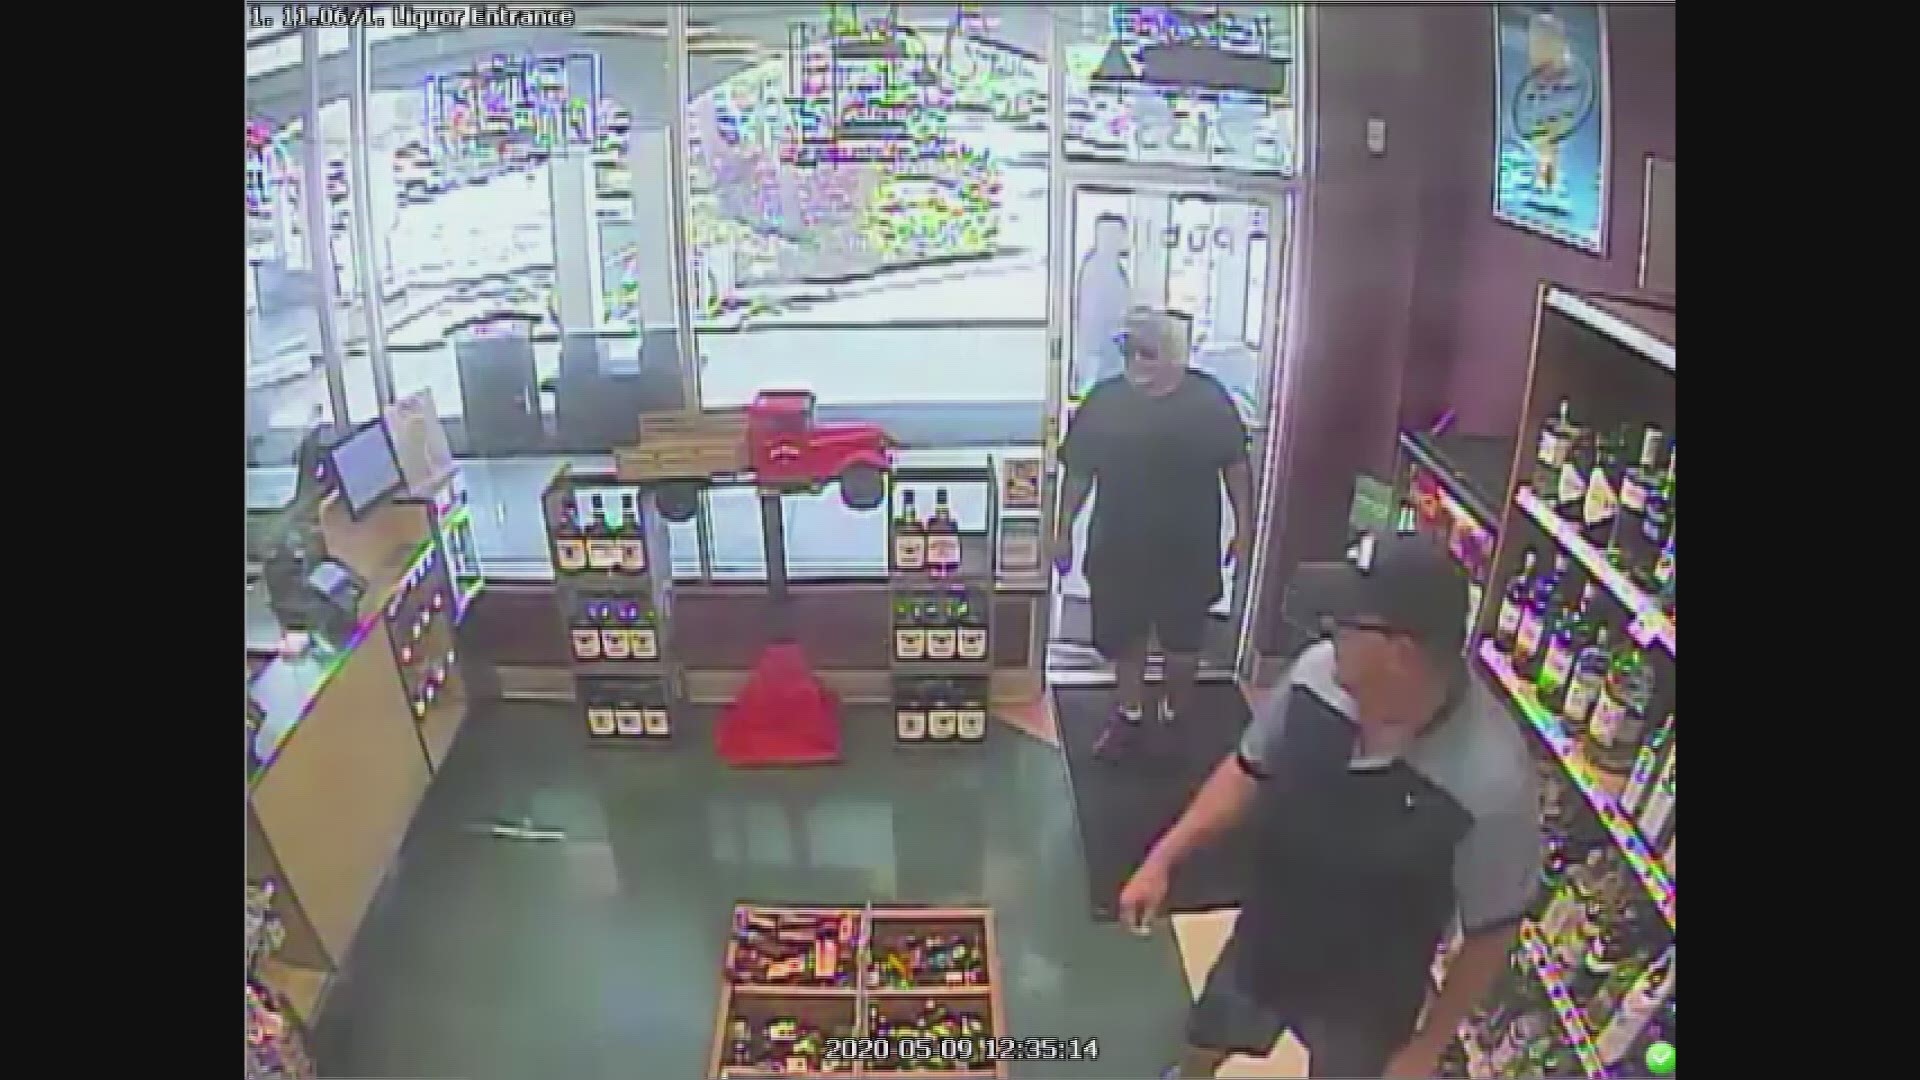 The Polk County Sheriff's Office needs your help to identify a man they say attacked another customer for not saying "thank you" when he held open a door for him.